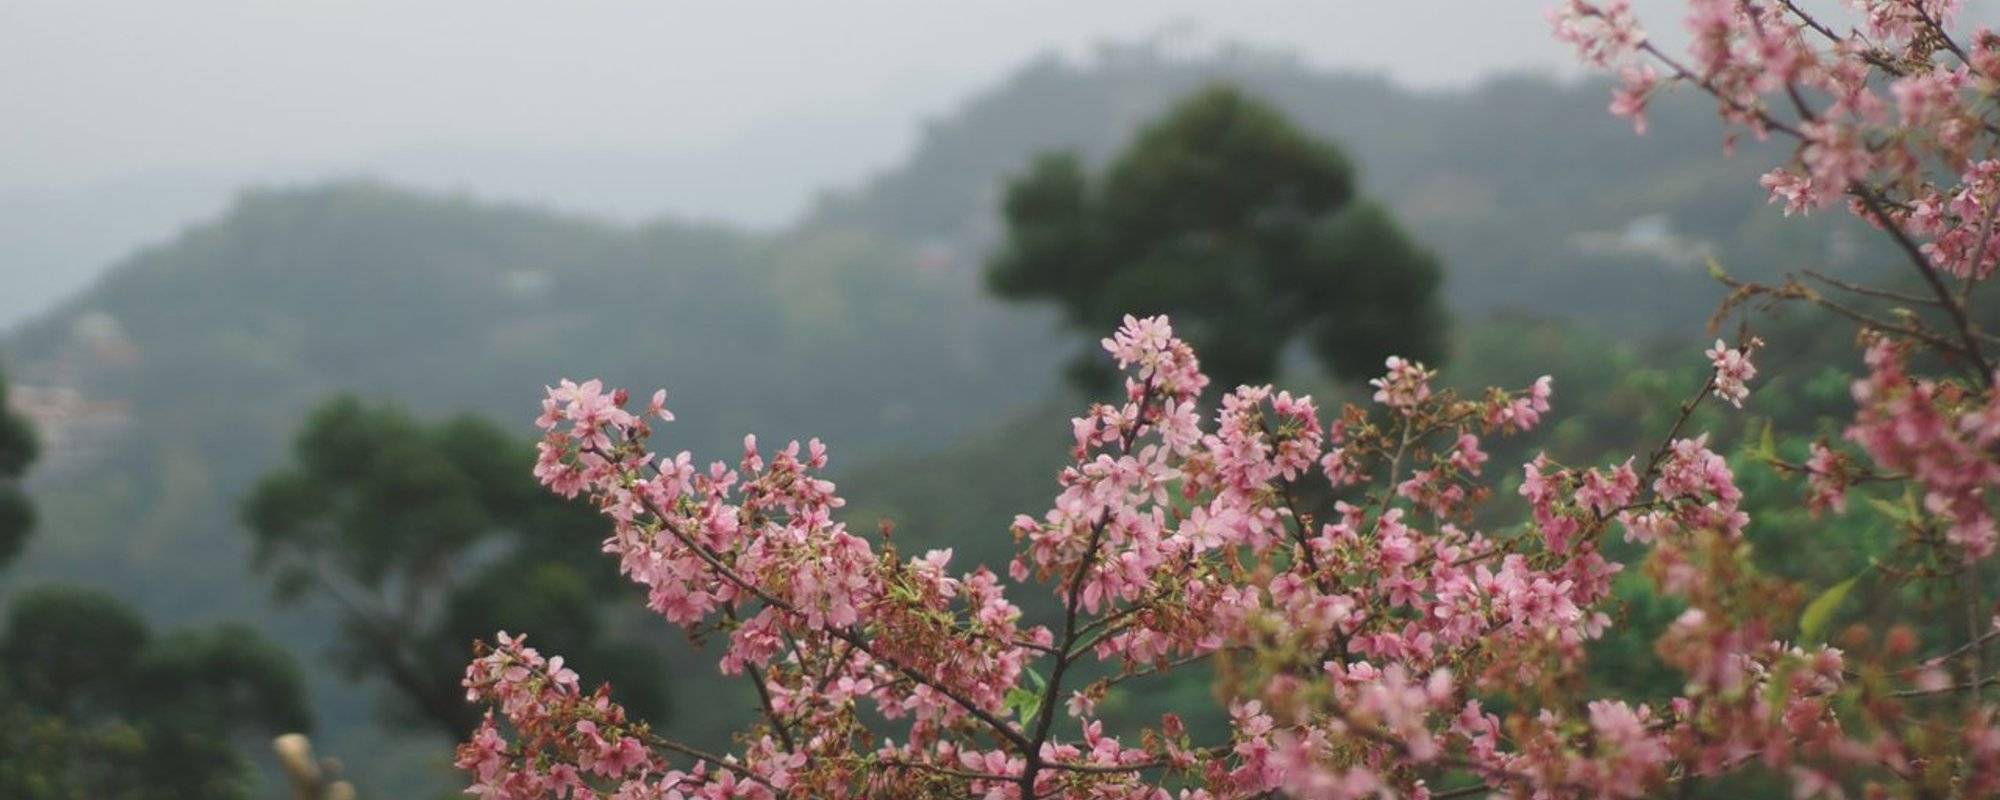 Taipei Trip: First Real Cherry Blossom at Maokong